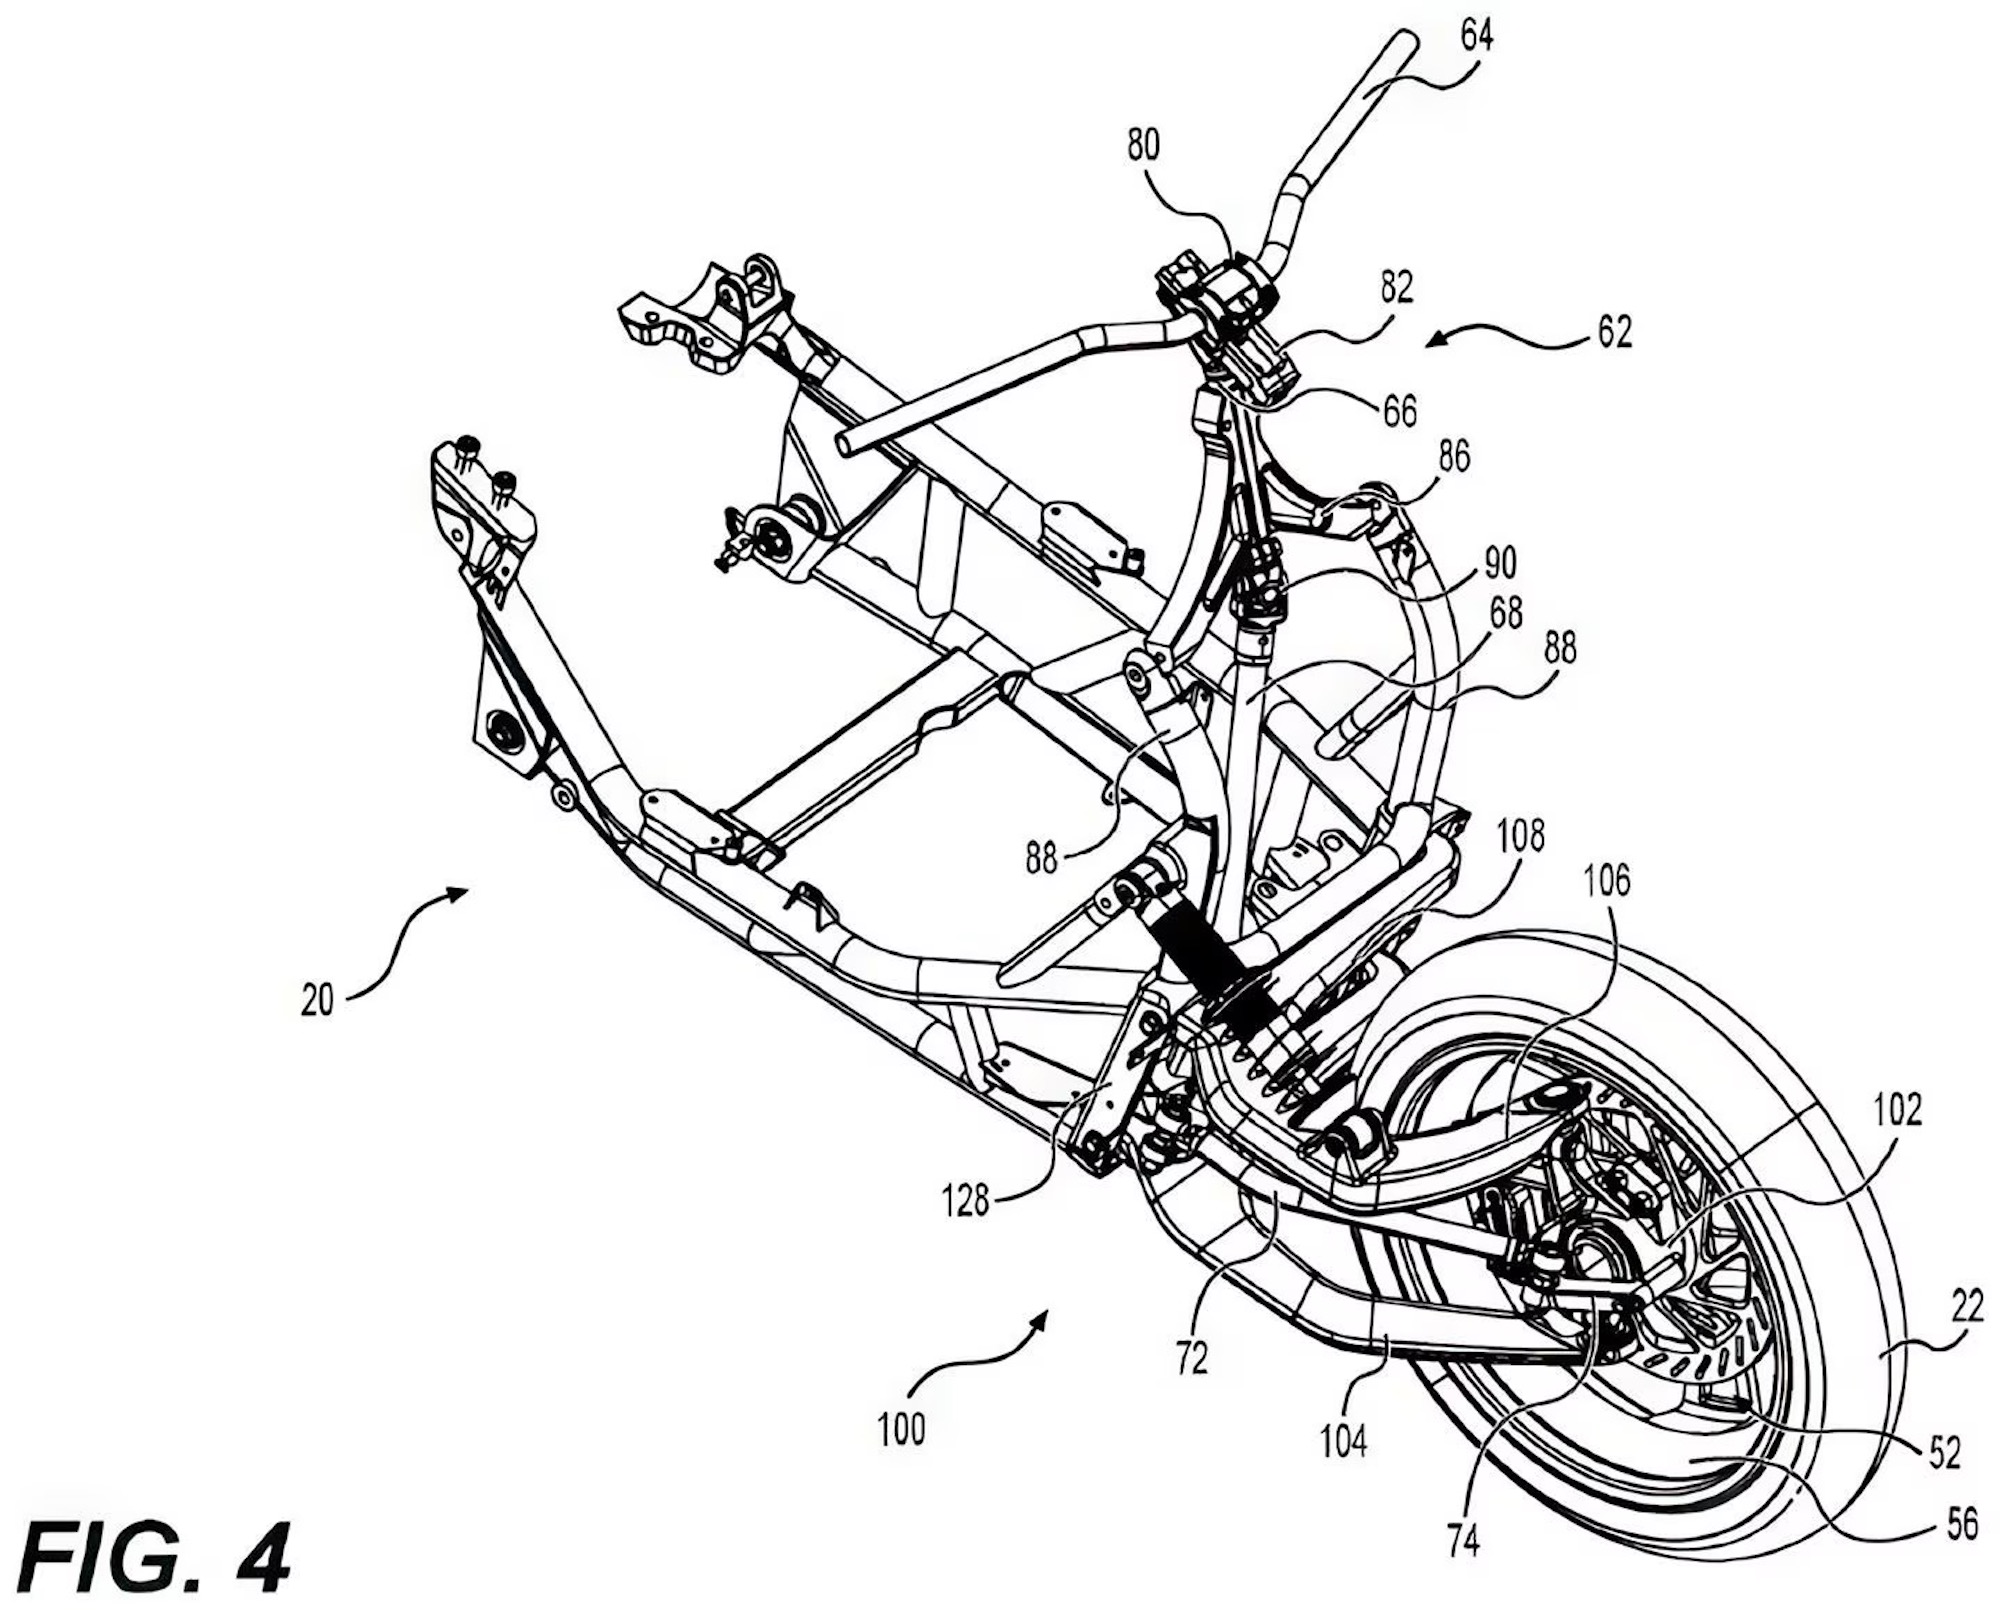 Patent images showing a hub-steering ICE bike underway in BRP's headquarters. Media sourced from CycleWorld.